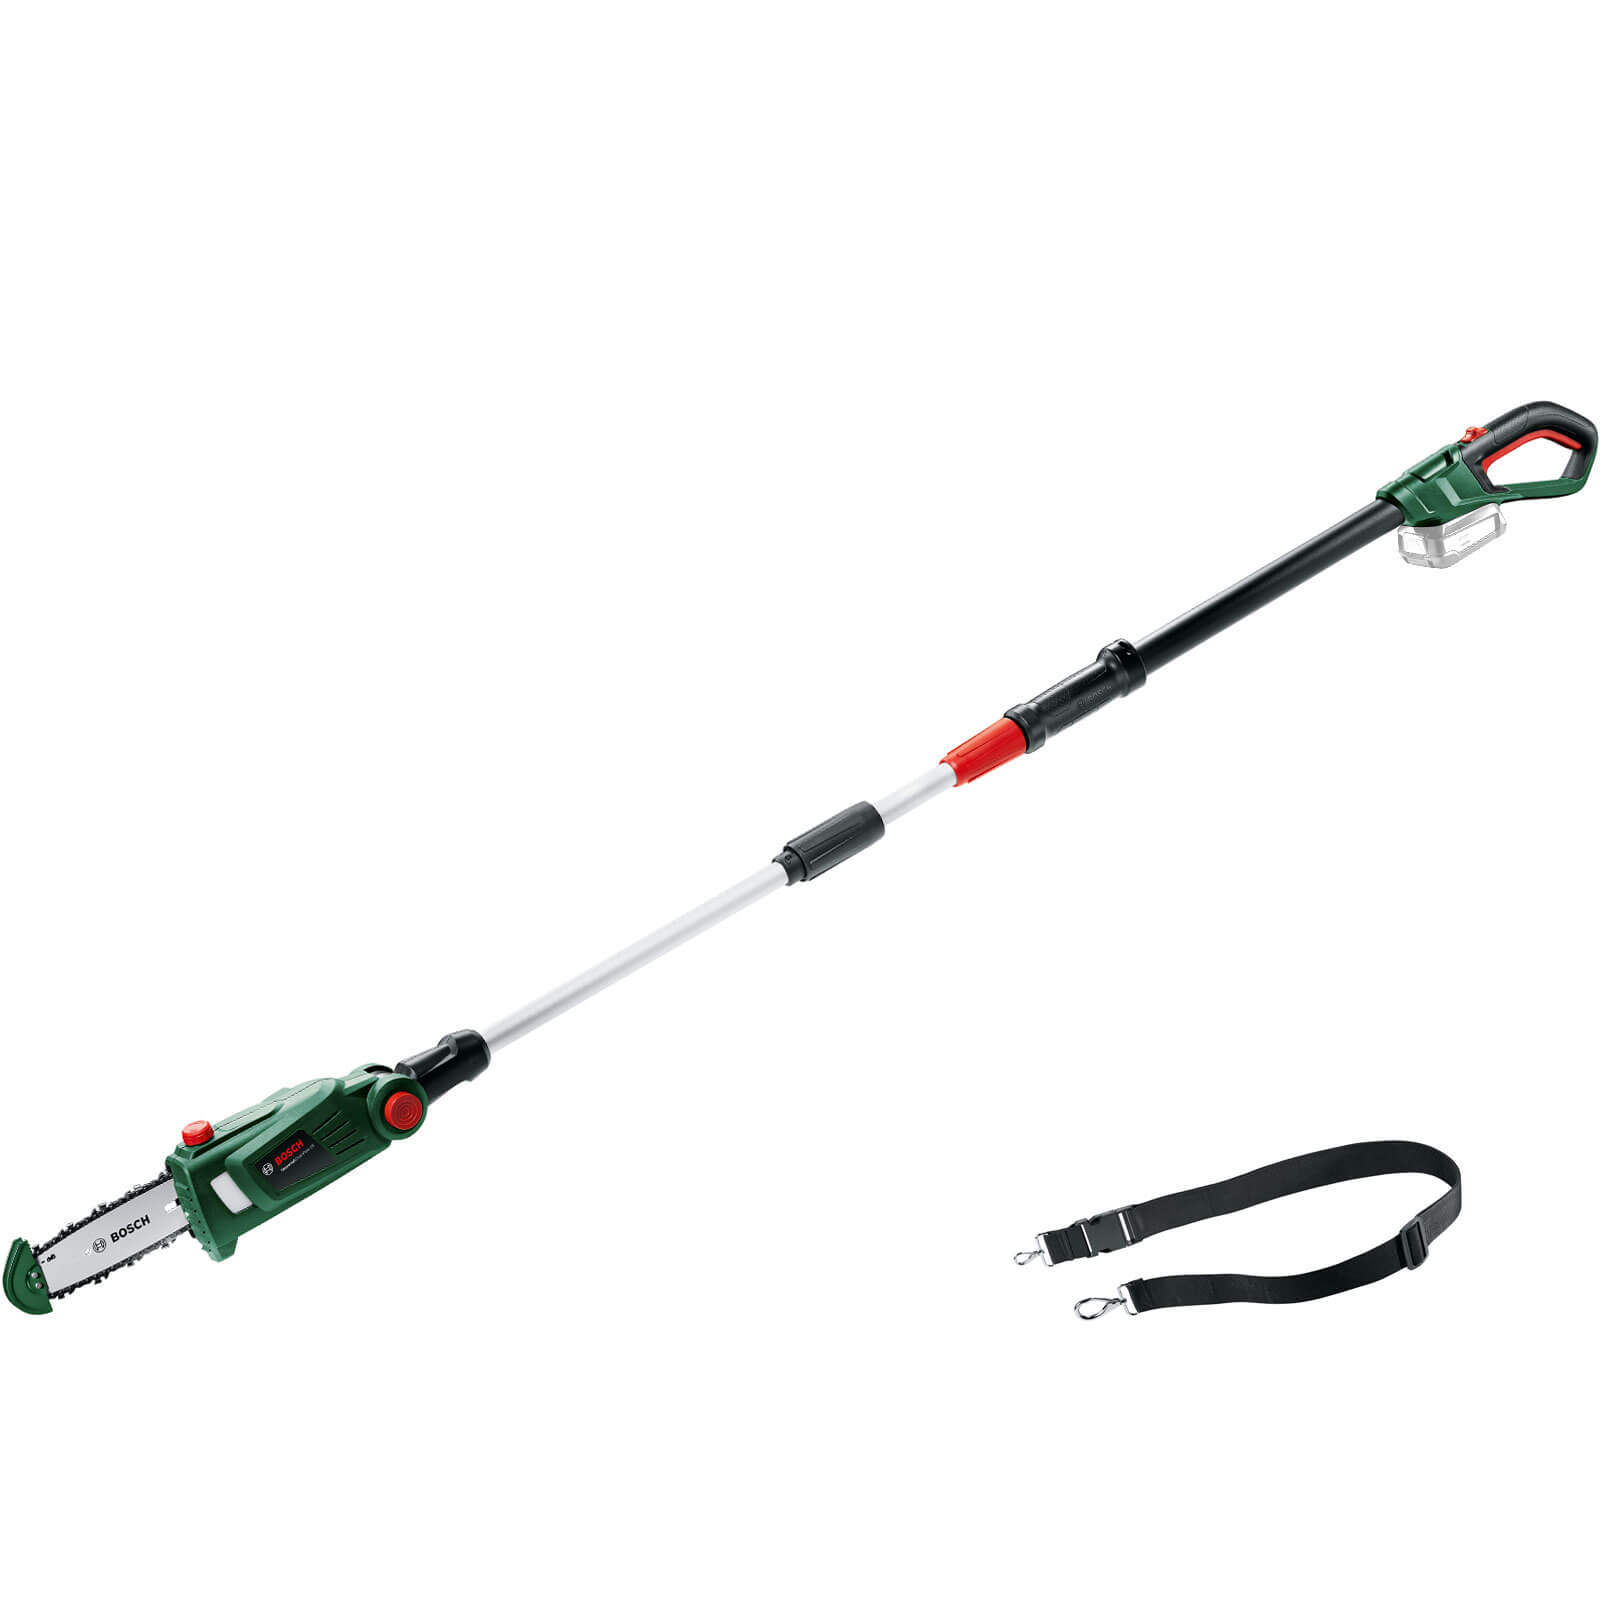 Bosch UNIVERSALCHAINPOLE P4A 18v Cordless Telescopic Pole Tree Pruner 200mm No Batteries No Charger FREE Chainsaw Oil 1L Worth £8.95